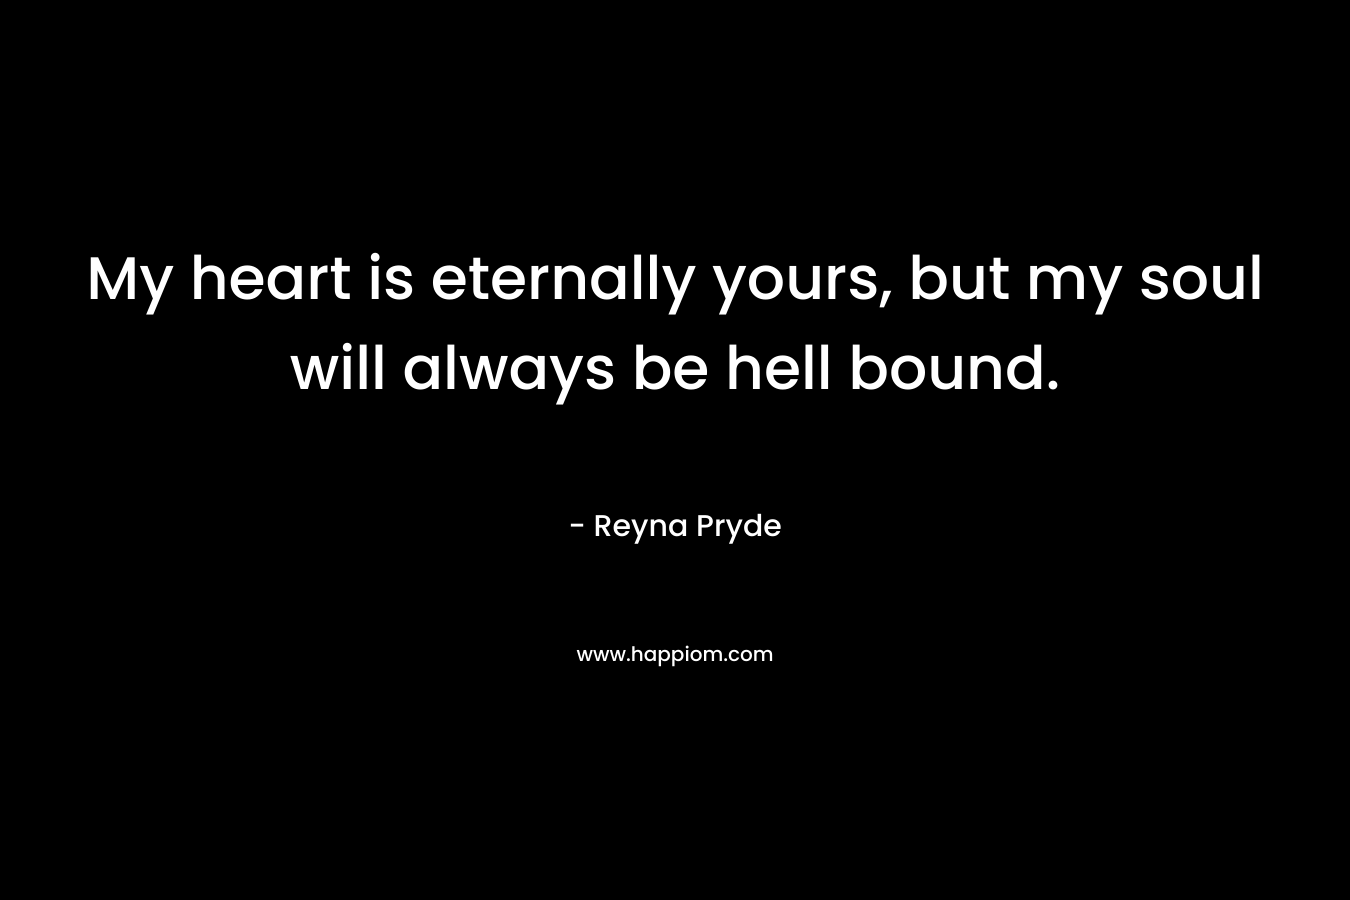 My heart is eternally yours, but my soul will always be hell bound.